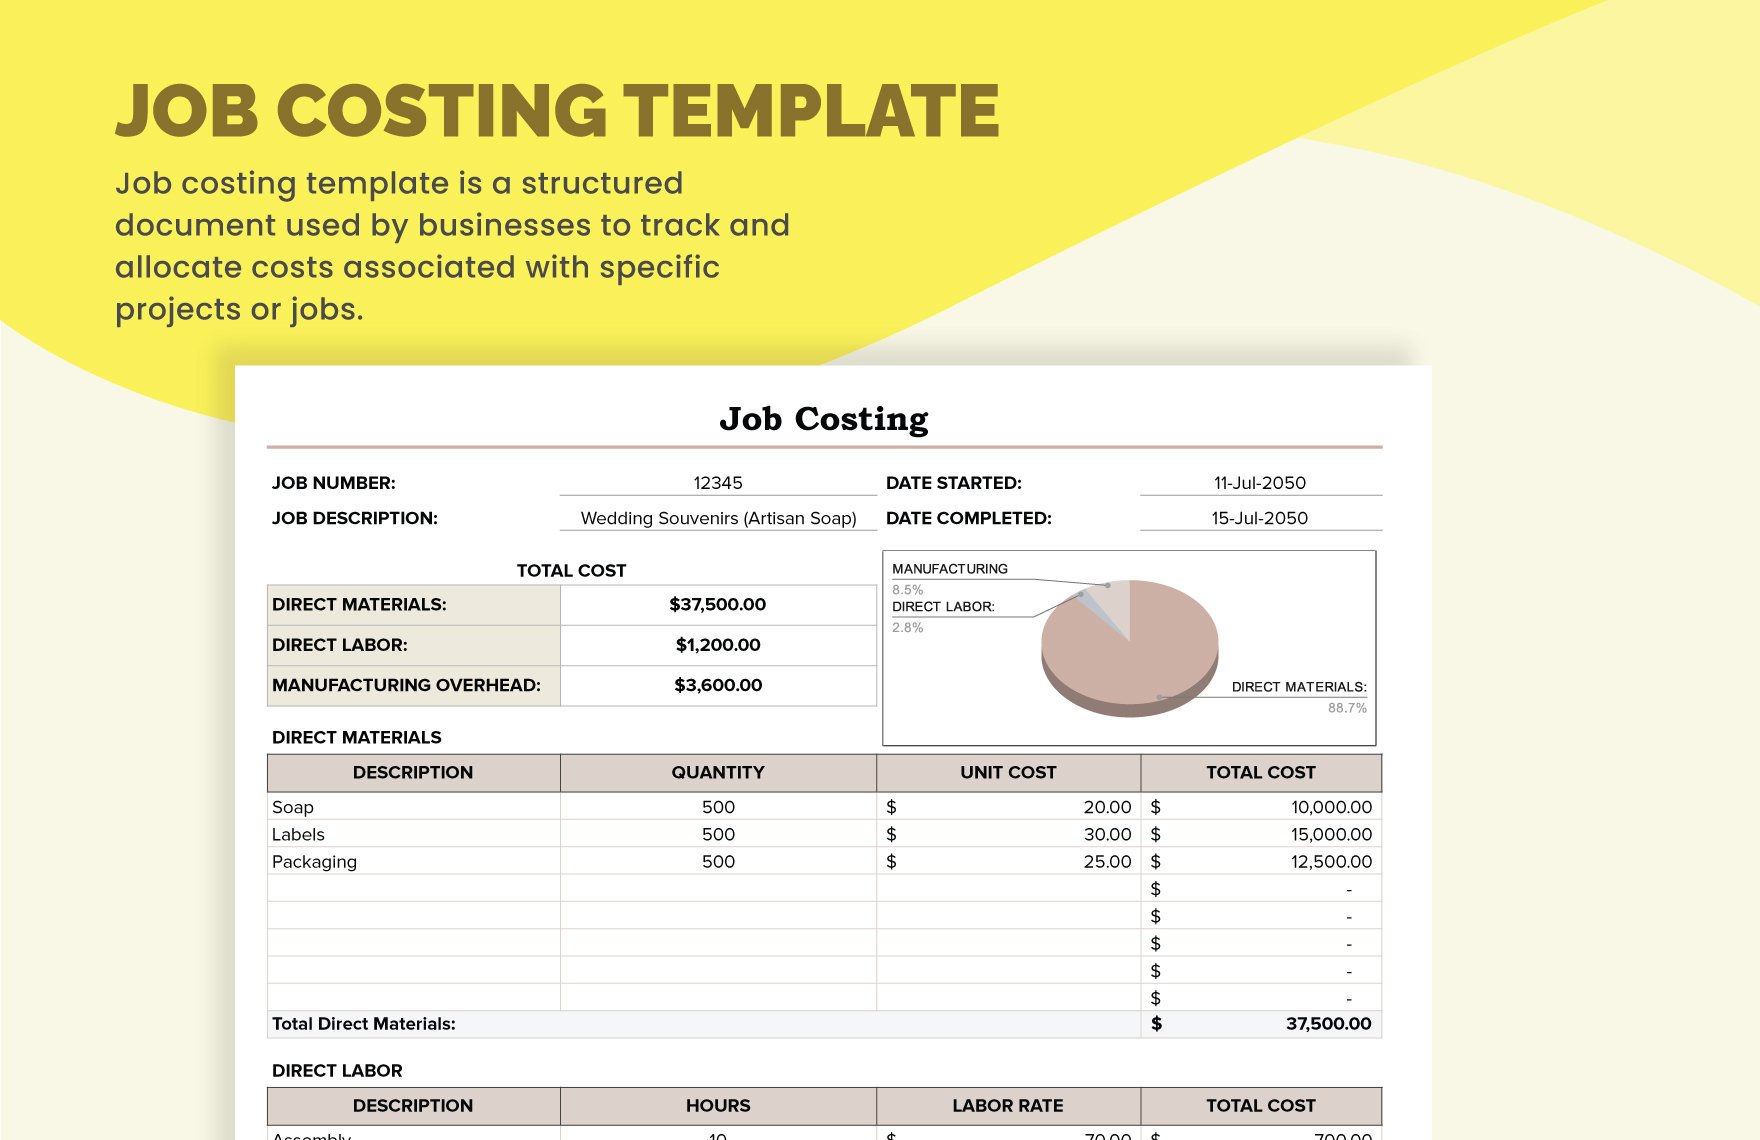 Job Costing Template in Excel, Google Sheets